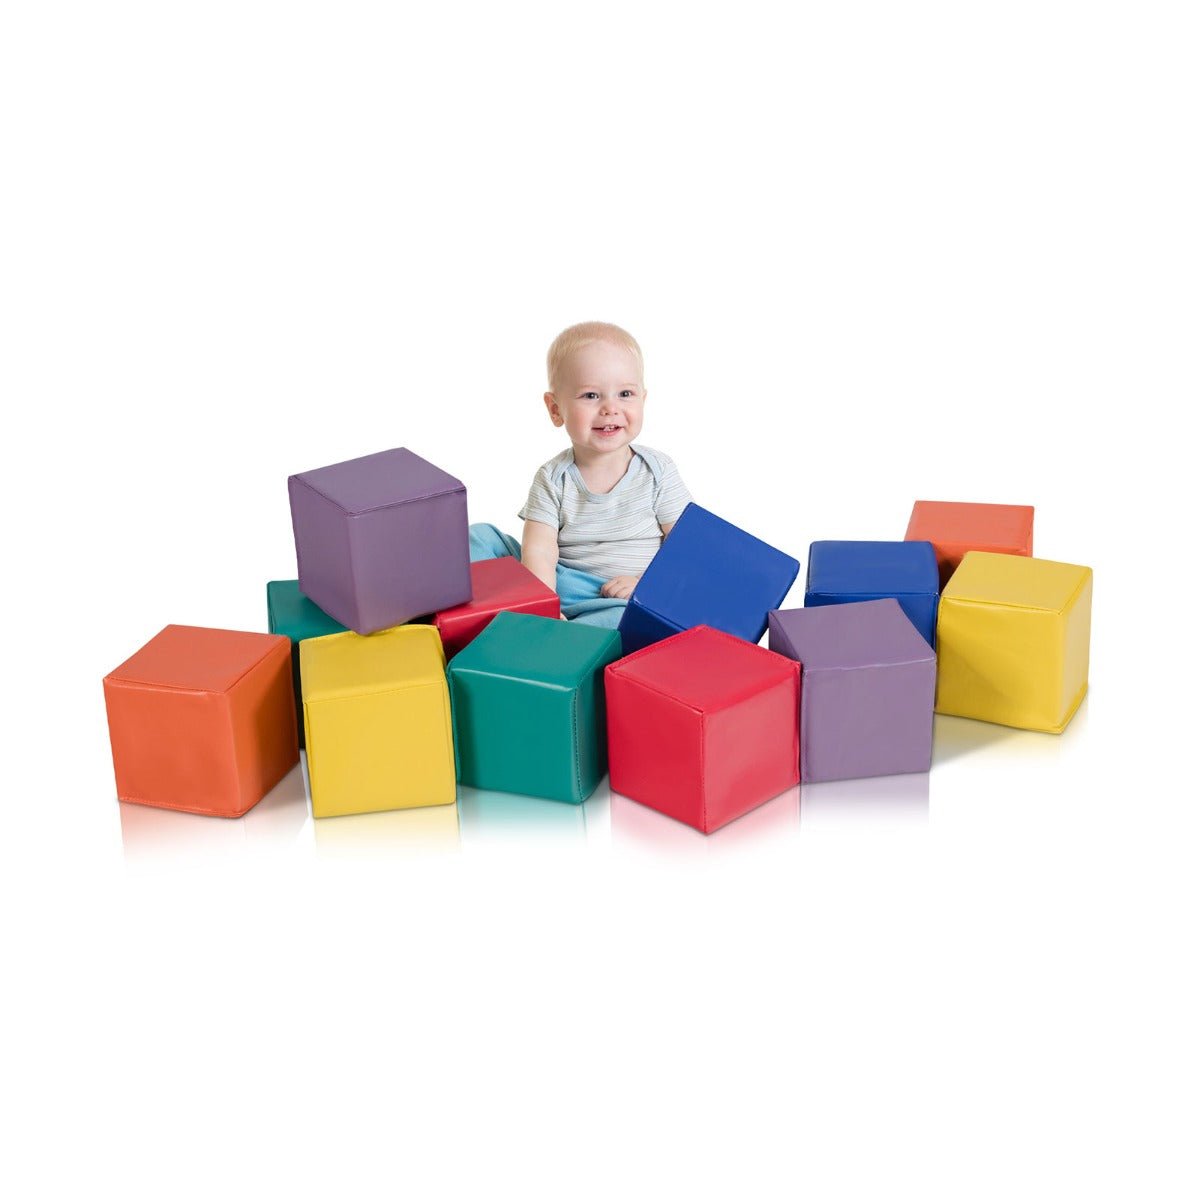 Adventure Awaits with Our Colourful Stacking Cubes Set